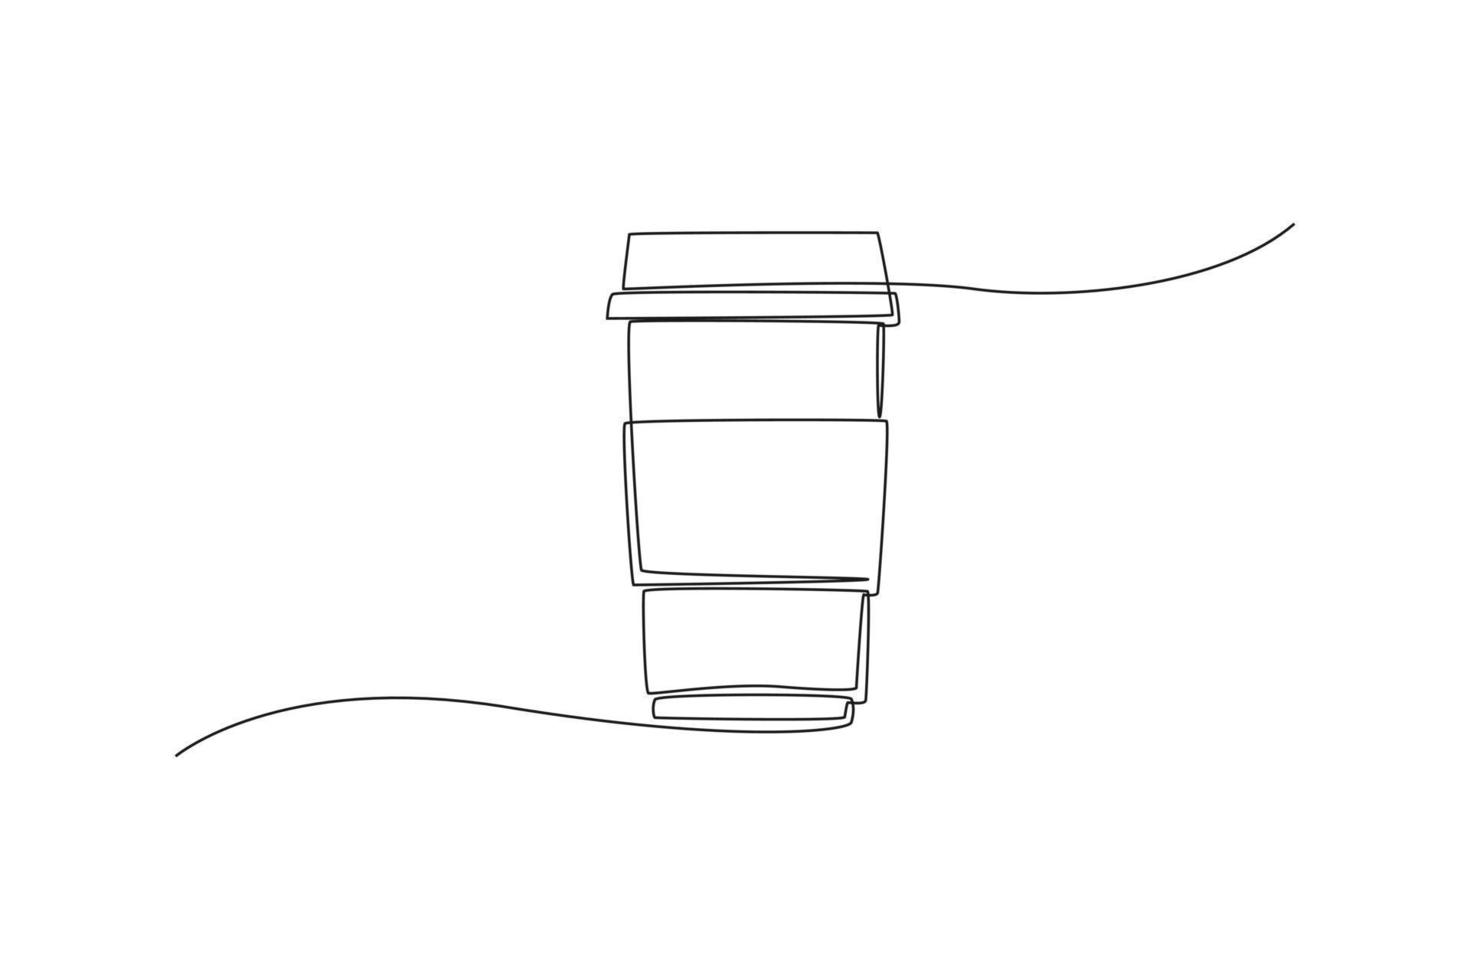 Continuous one line drawing a cup of coffee. International coffee day concept. Single line draw design vector graphic illustration.